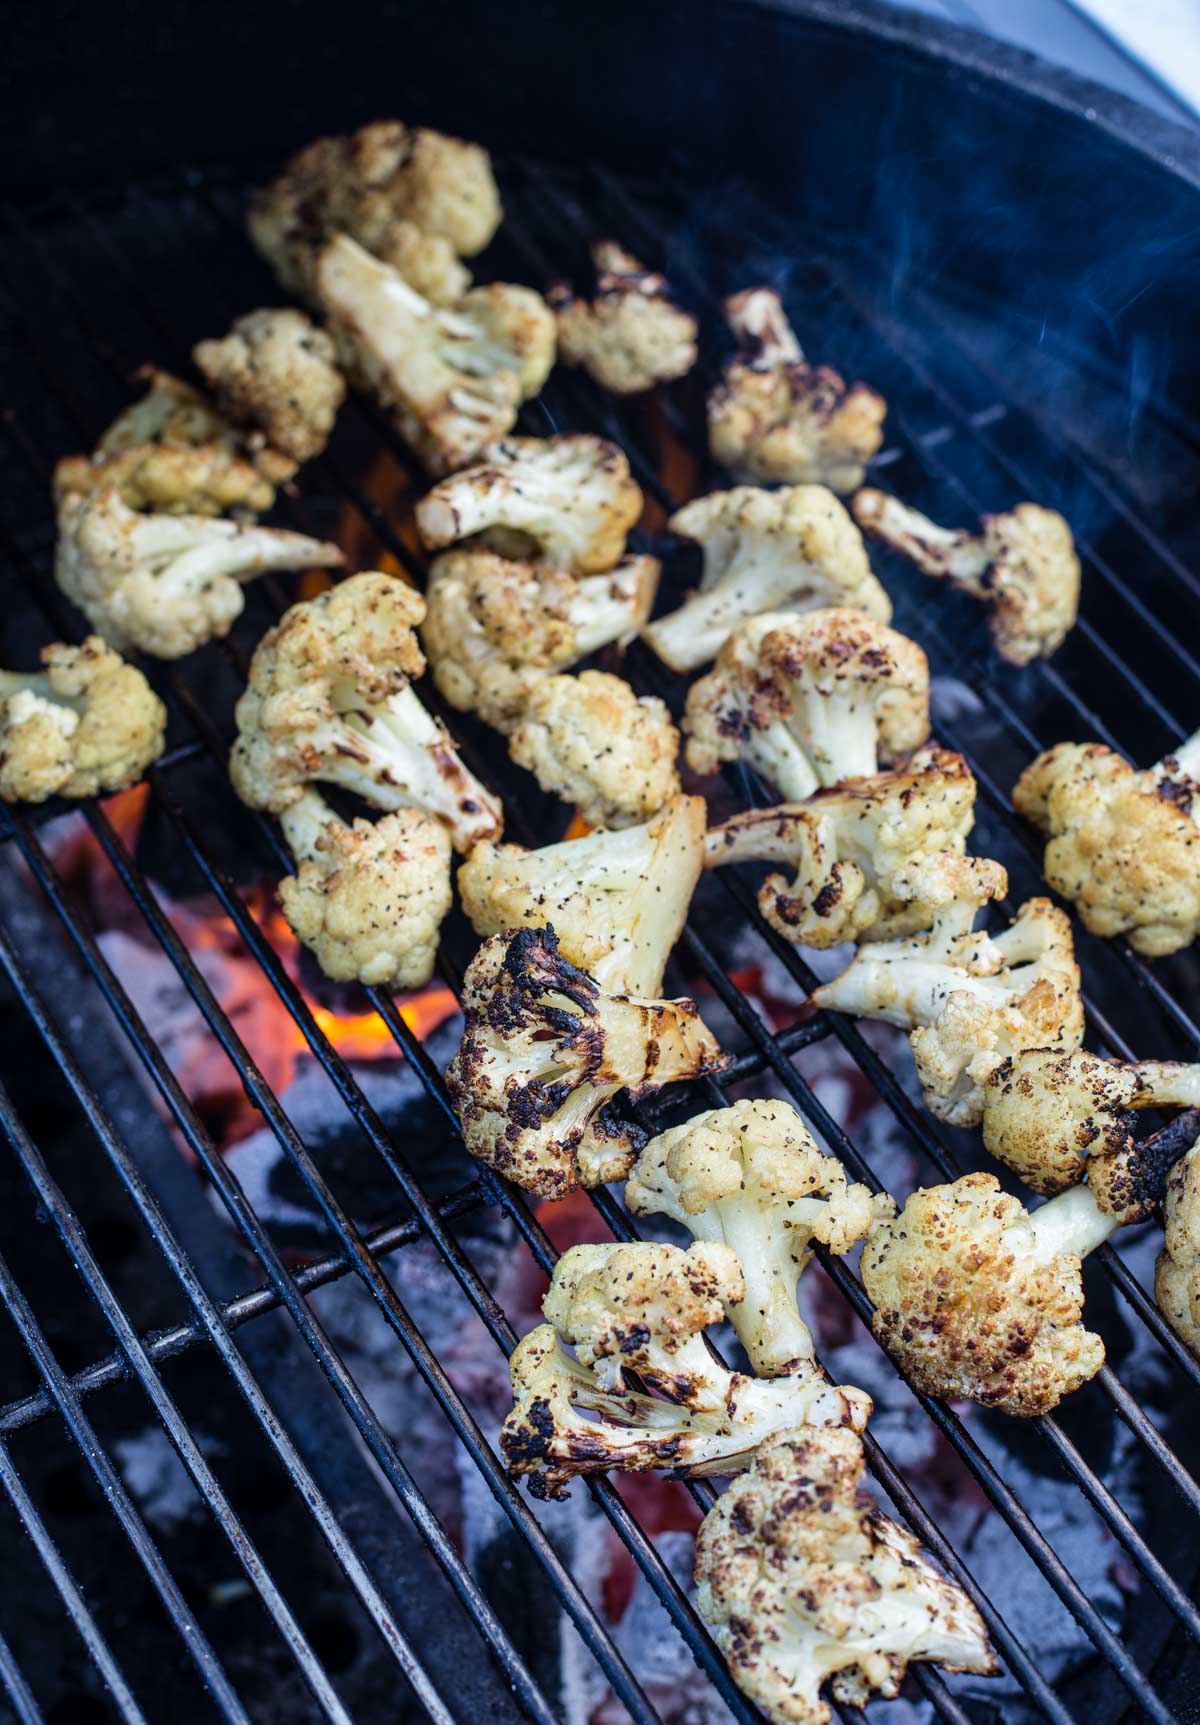 Cauliflower cooking on the grill